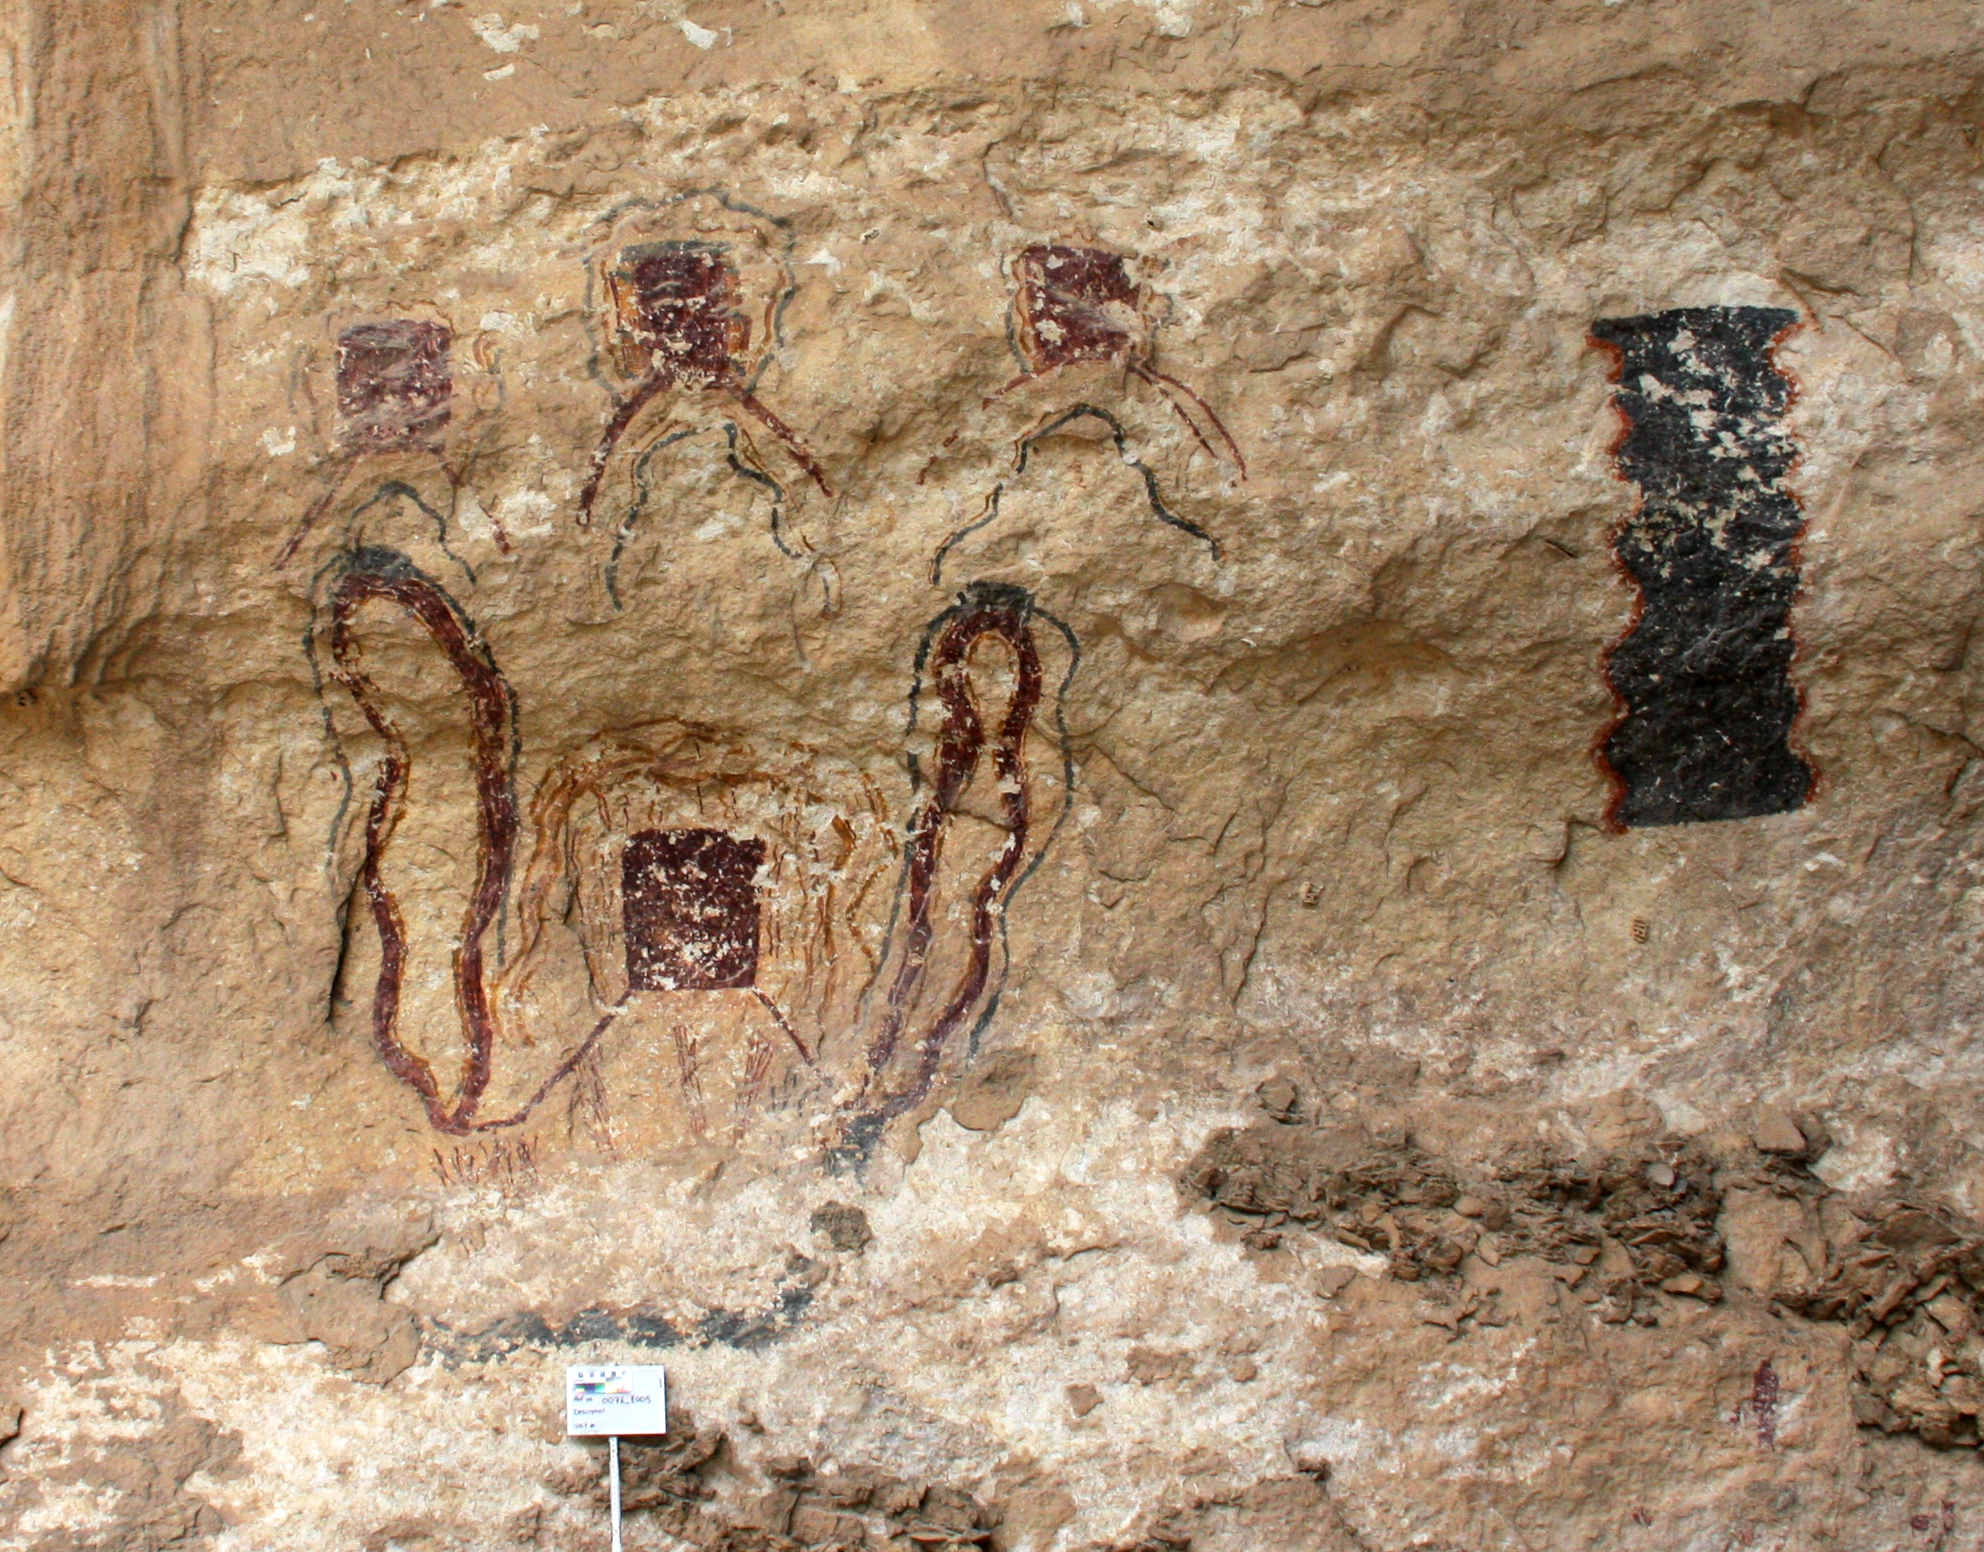 This is an example of many enigmatic figures together. There are four boxes with legs and several serpentine arches surrounding these elements. There is also a large crenulated shape on the right.